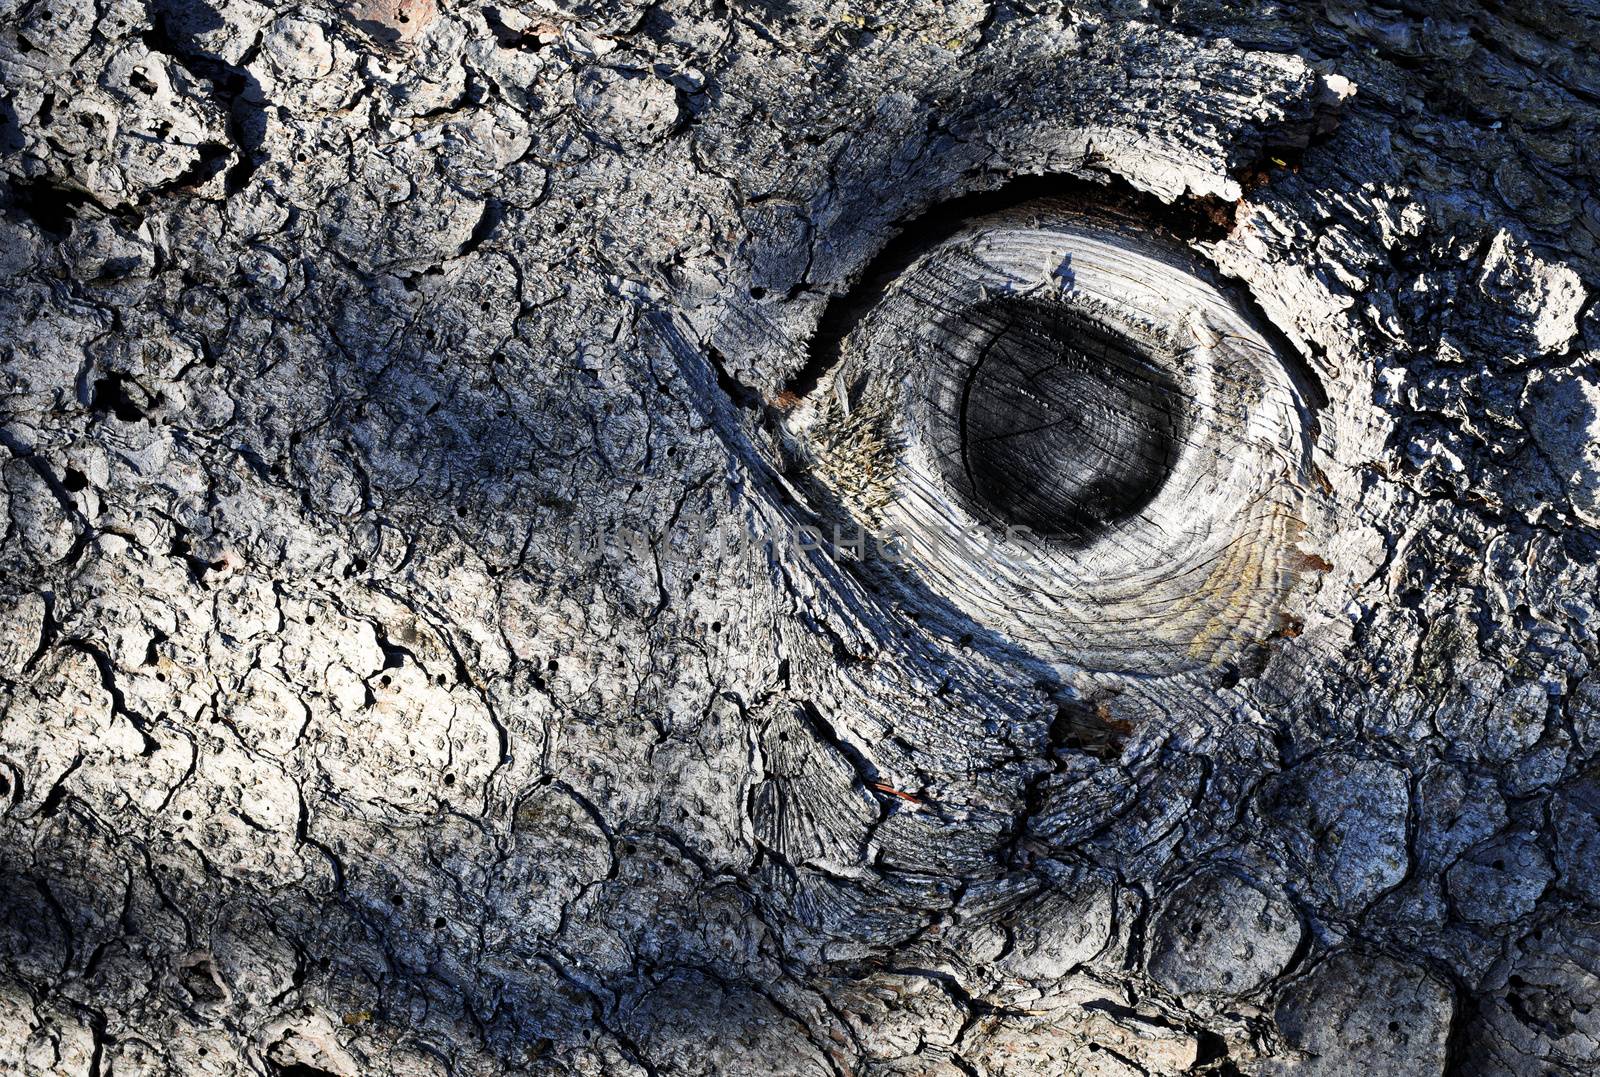 background or texture abstract eye on the bark of an old tree